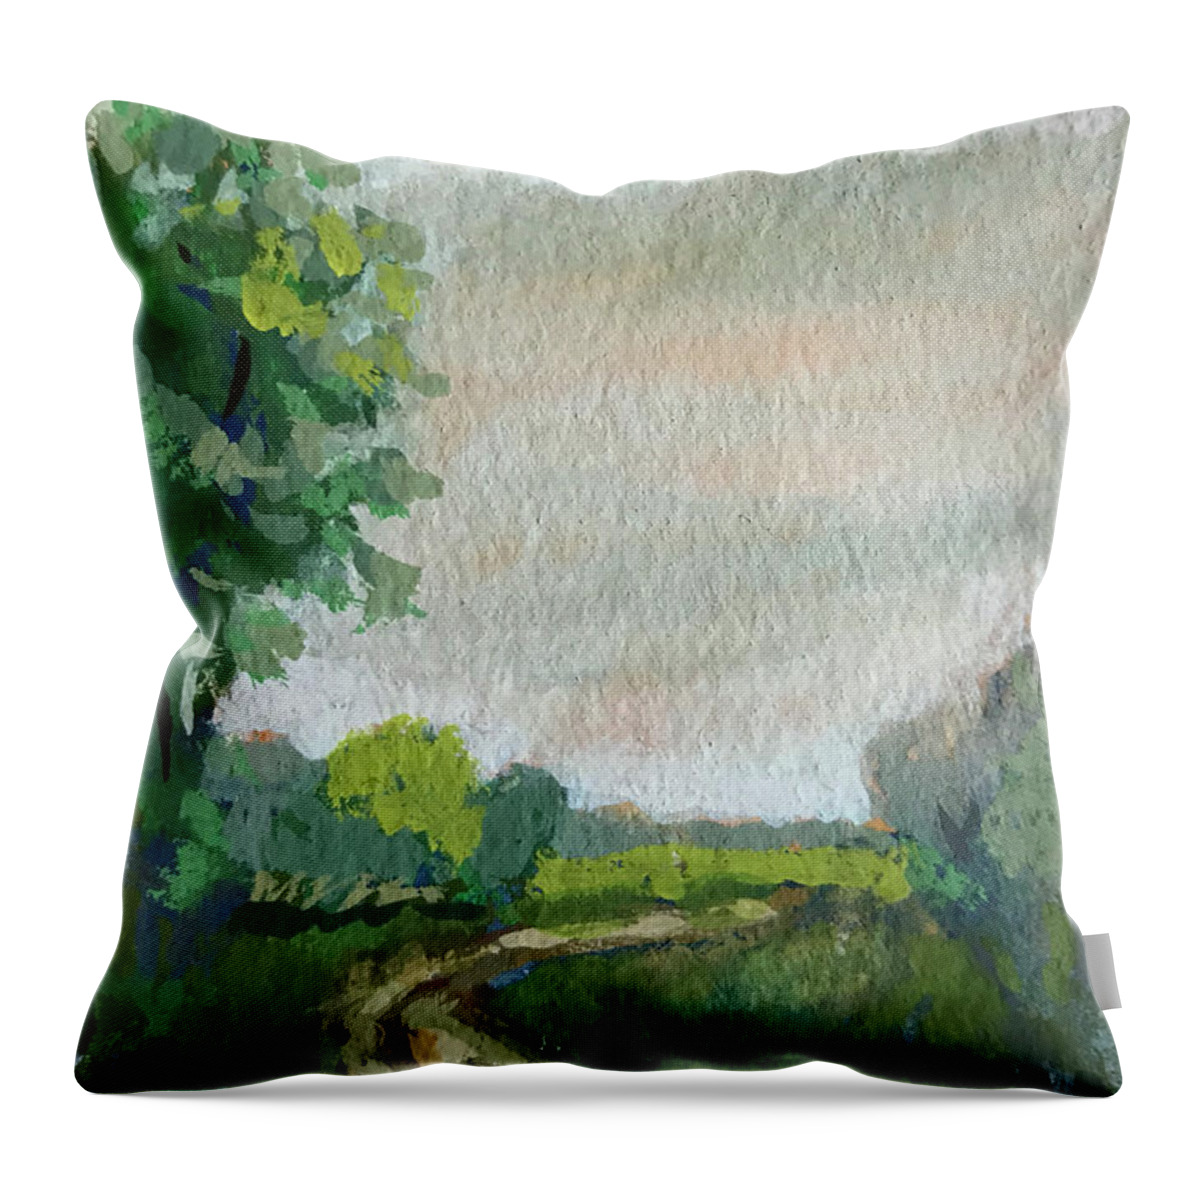 Landscape Throw Pillow featuring the painting Old Country Road by Linda Apple